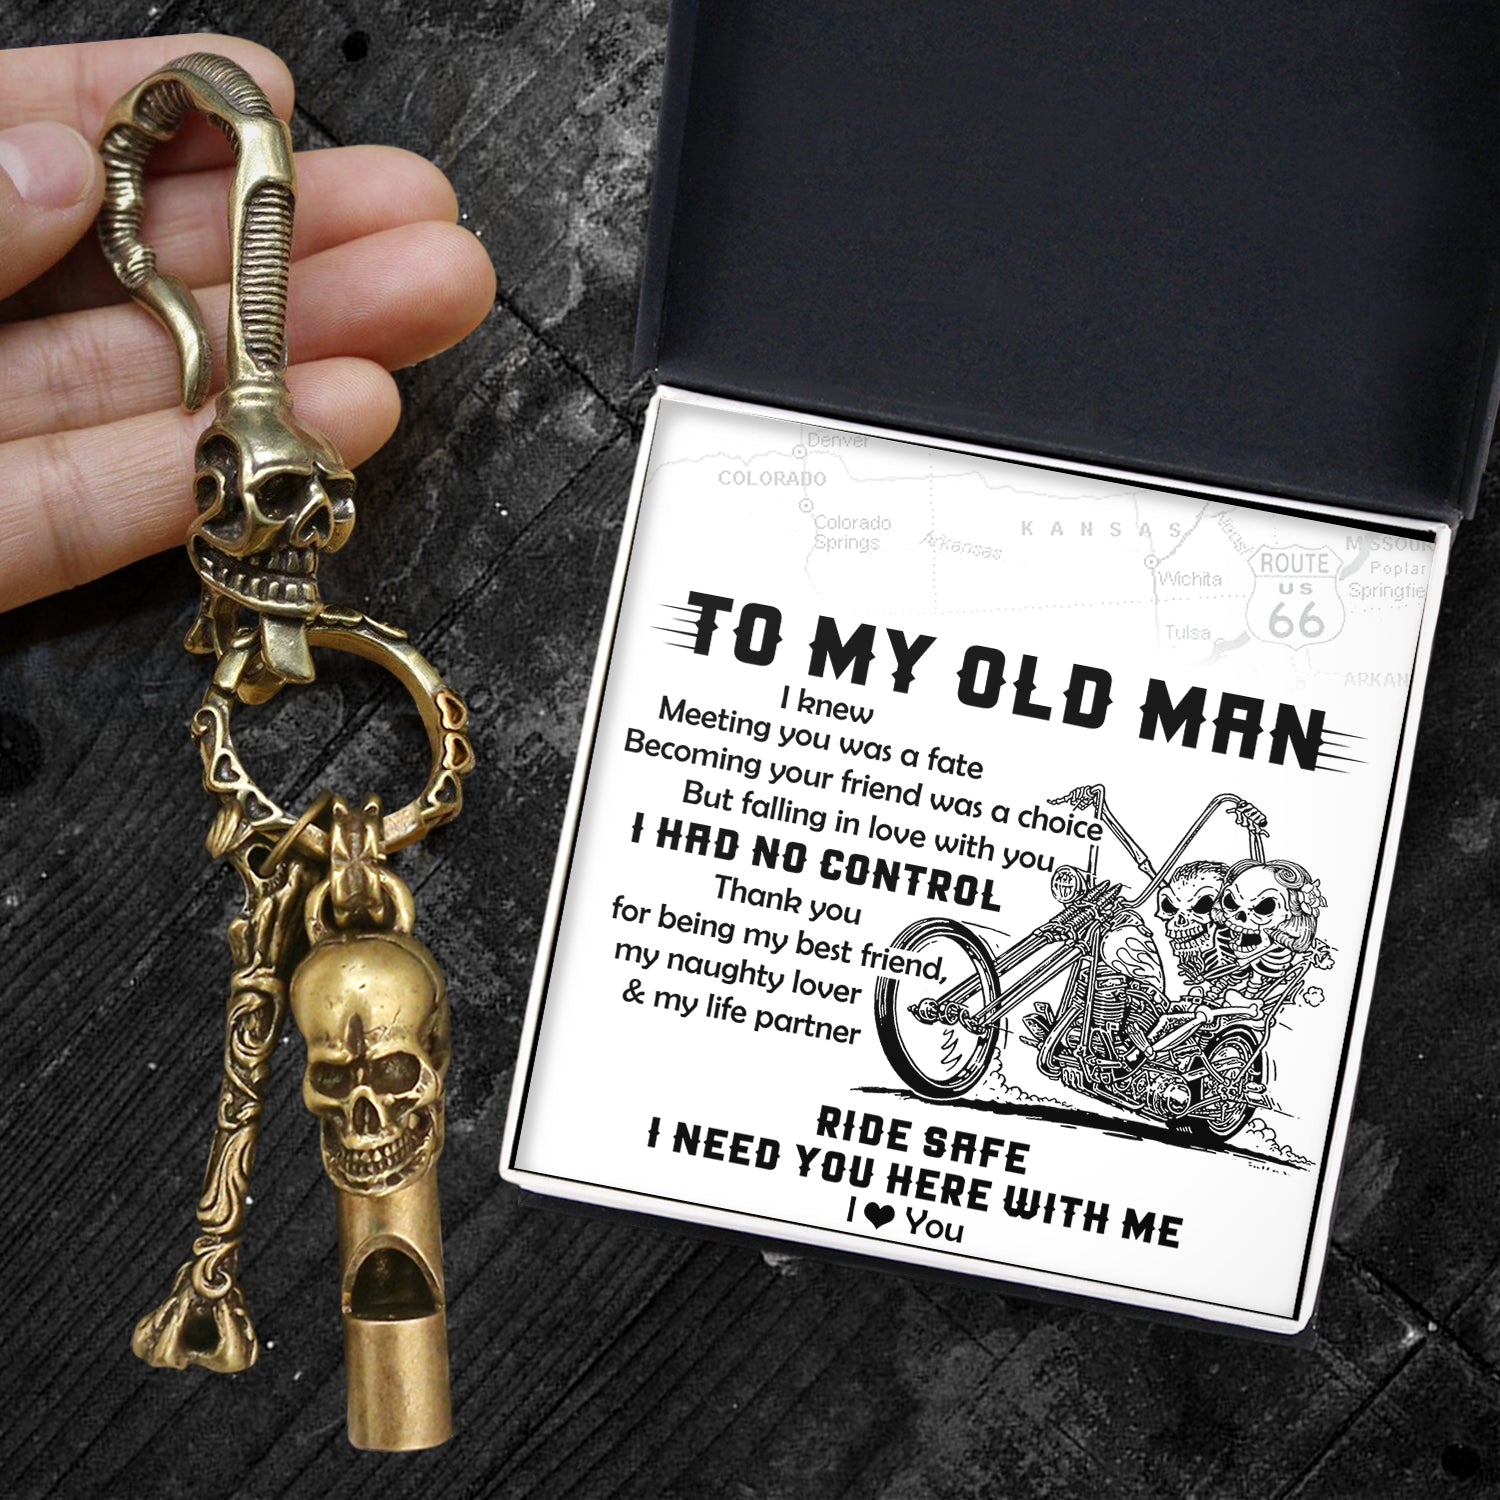 Skull Keychain Holder - Biker - To My Old Man - I Knew Meeting You Was A Fate - Ukgkci26016